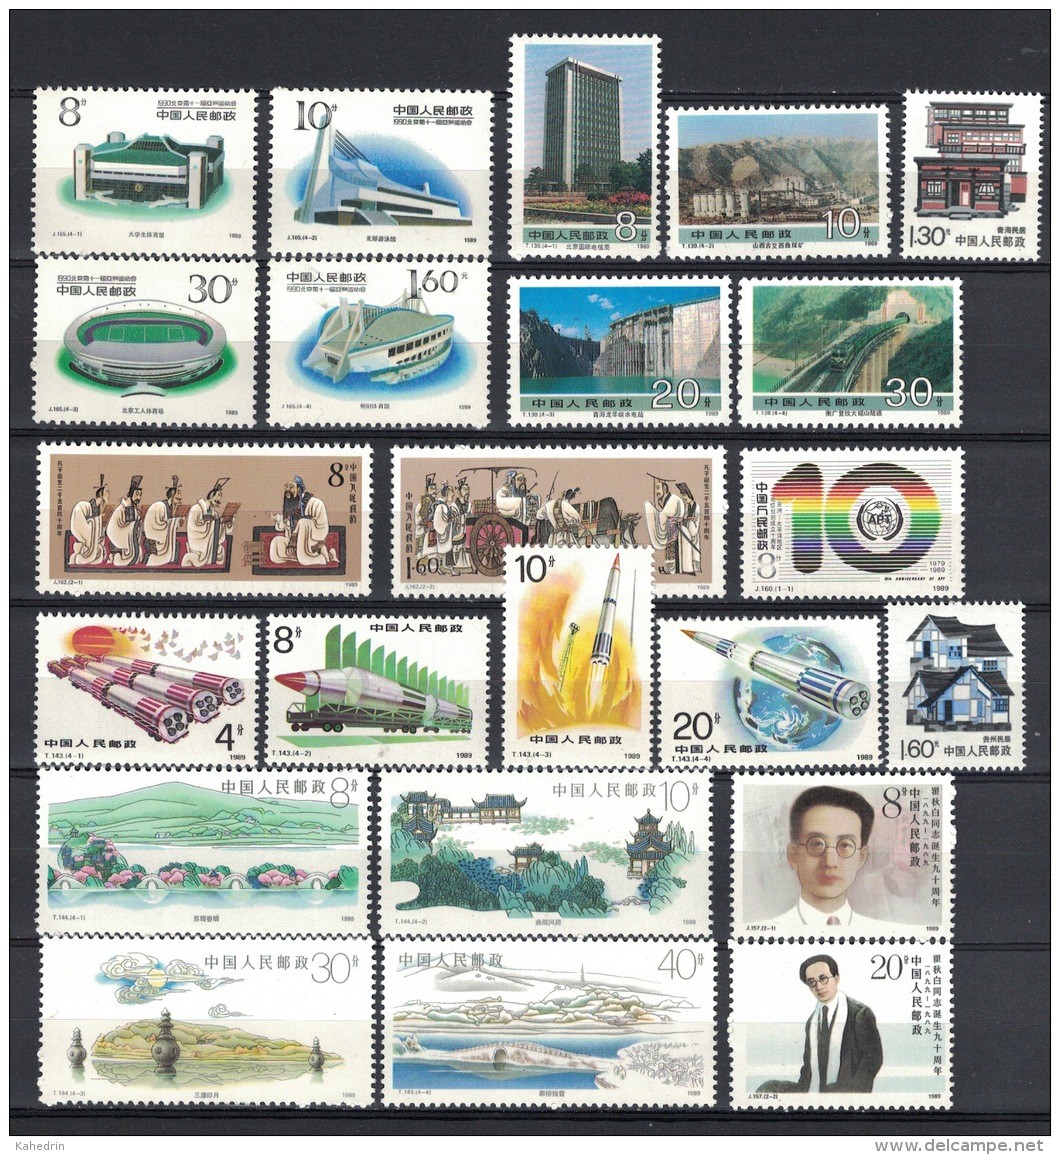 PR China 1989, 8x Series (23 Stamps) **, MNH - Unused Stamps